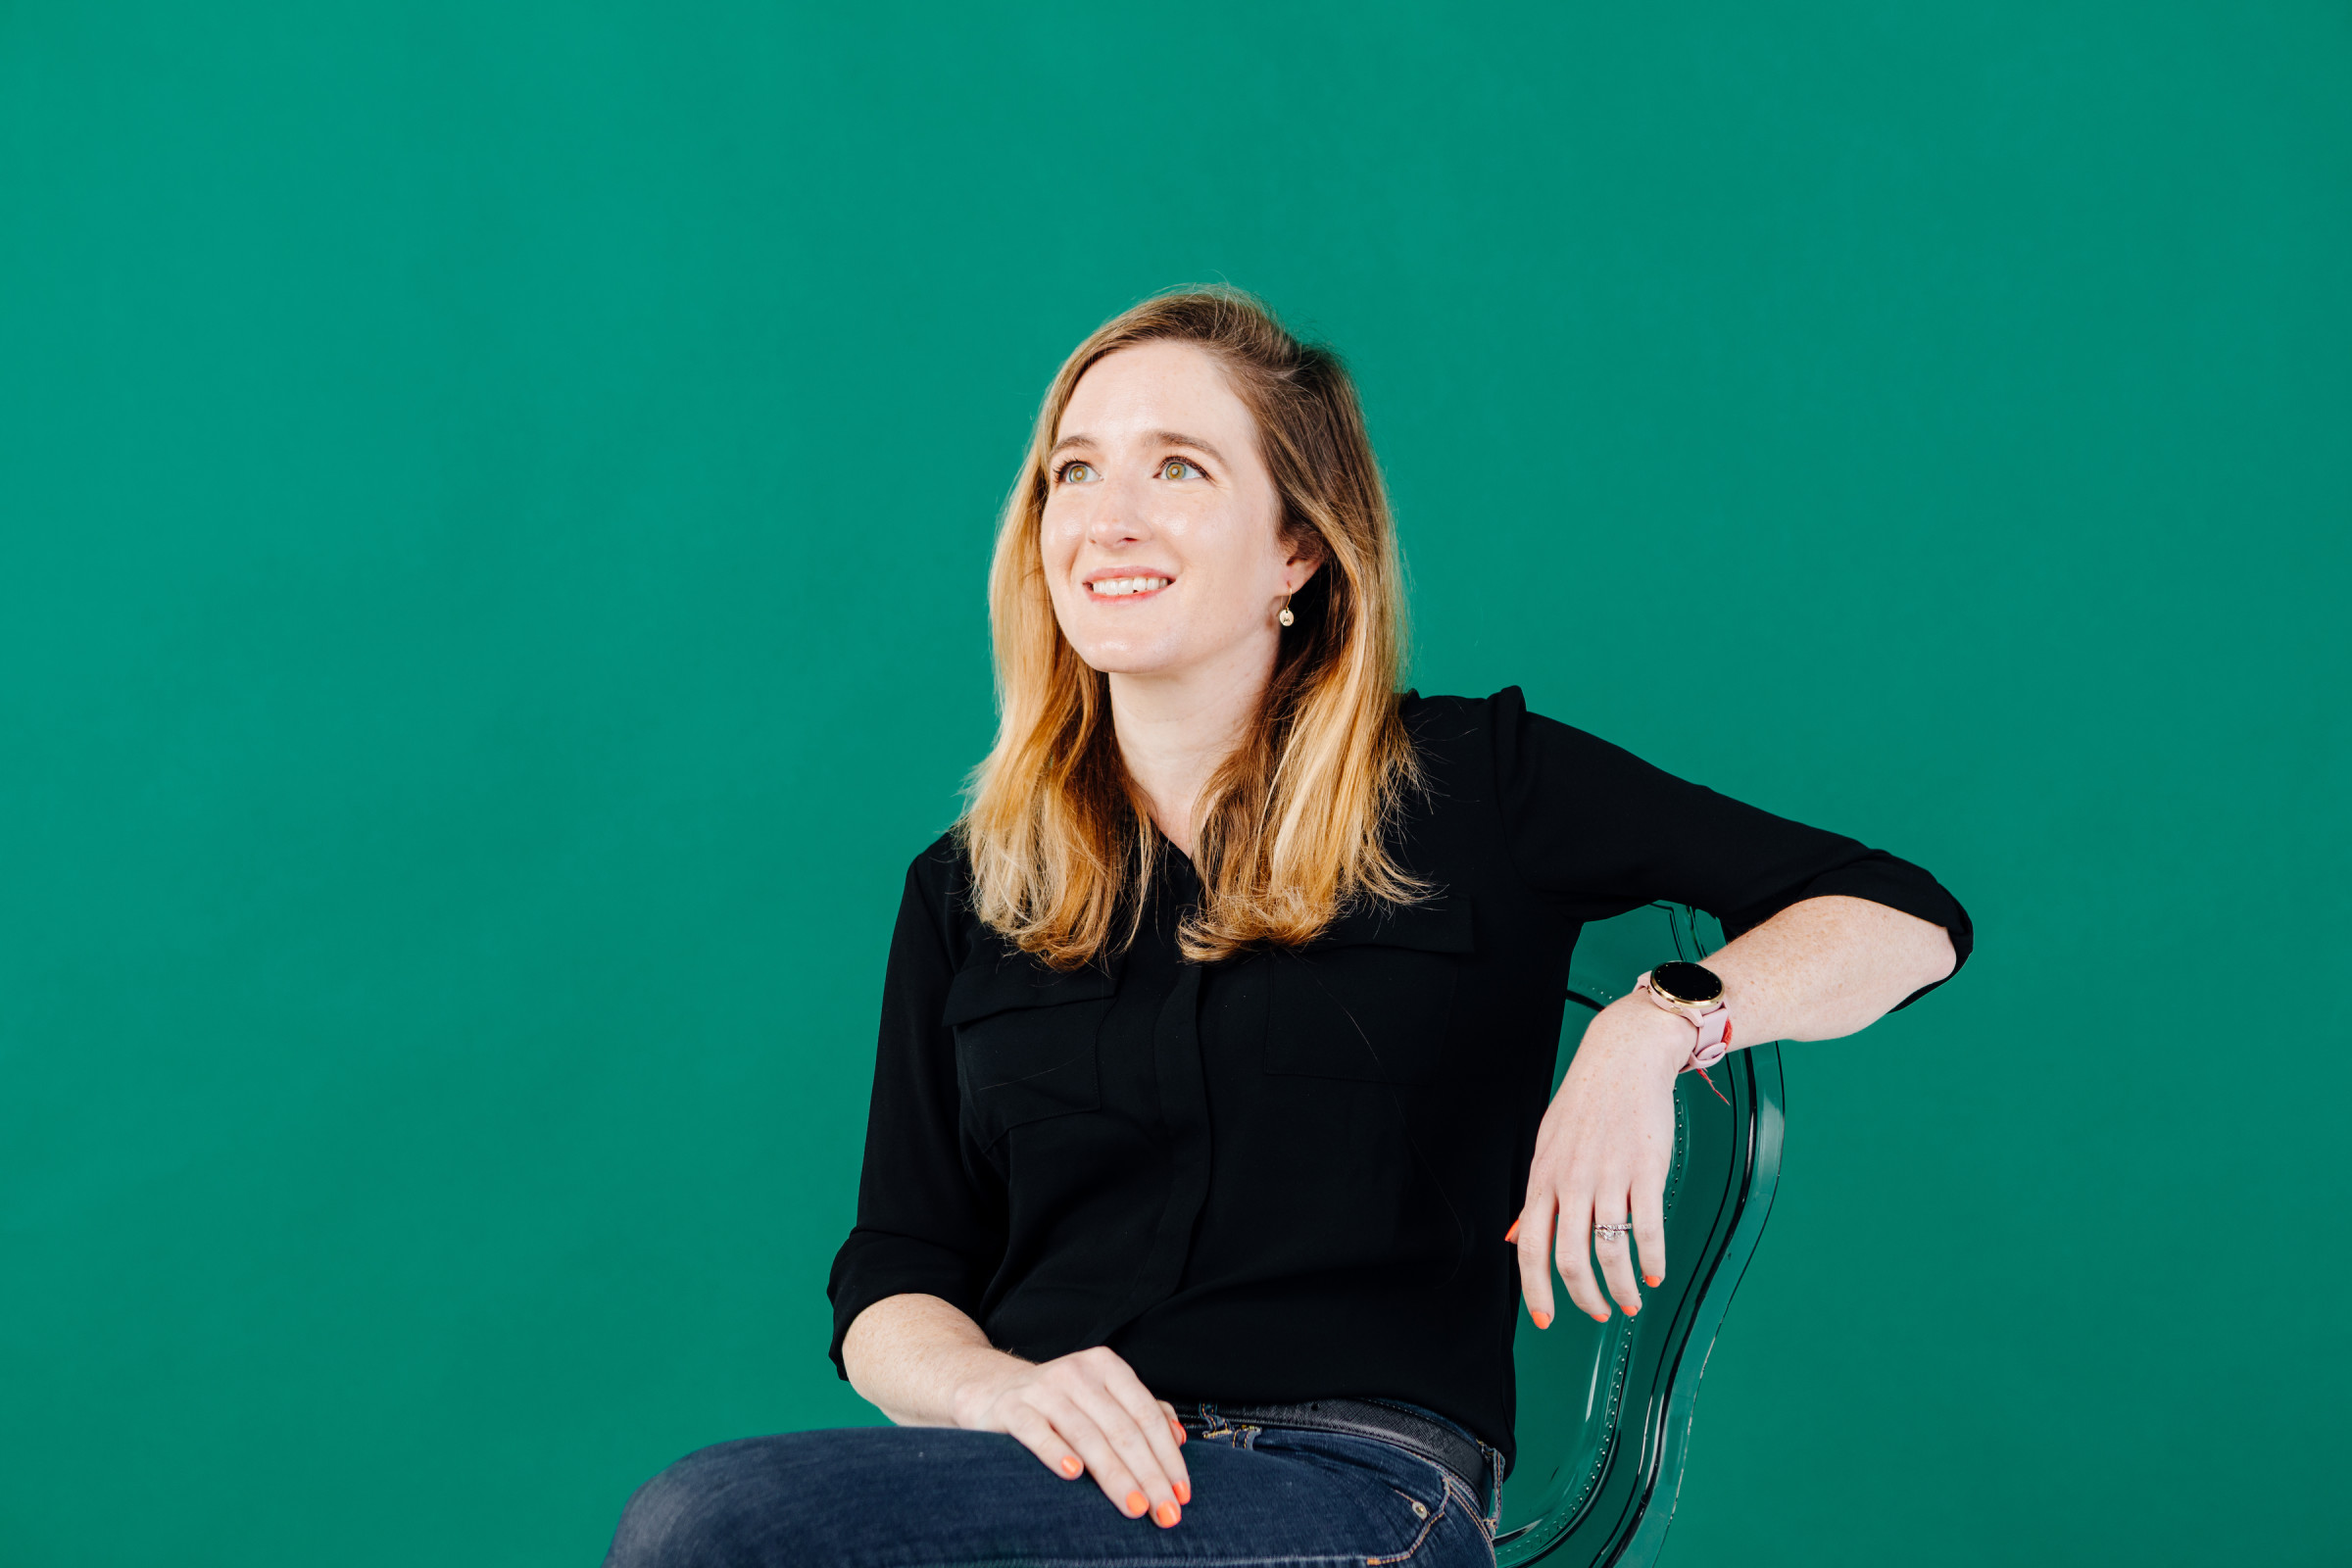 Author Keeley sitting in a chair and gazing up against a kelly green backdrop